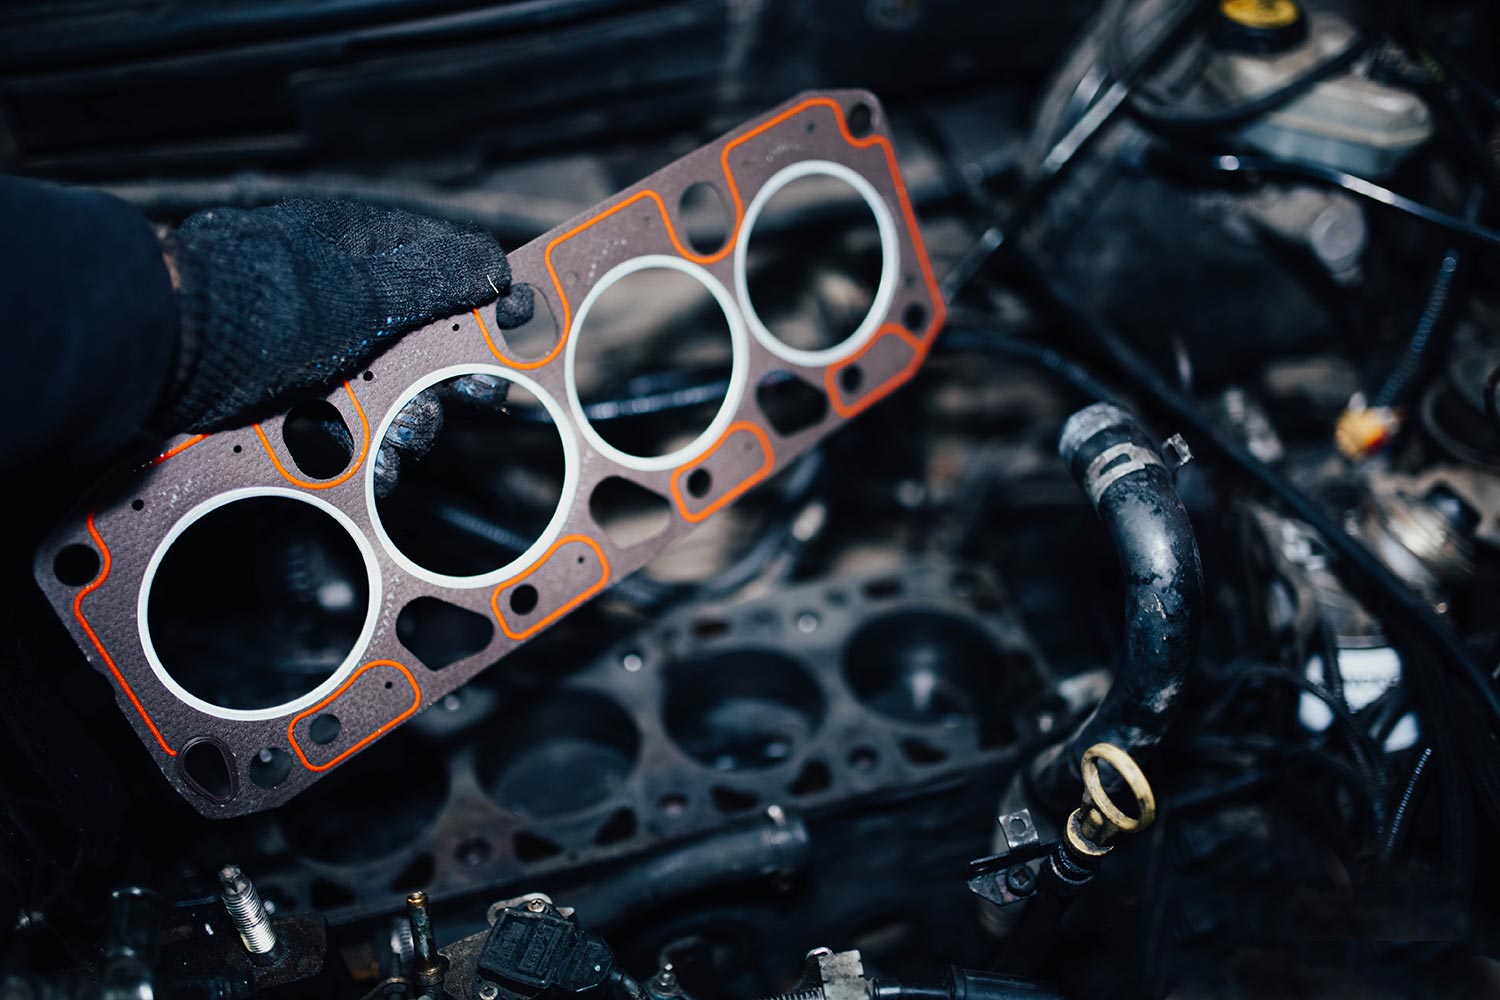 Replacement of the cylinder head gasket in the car engine